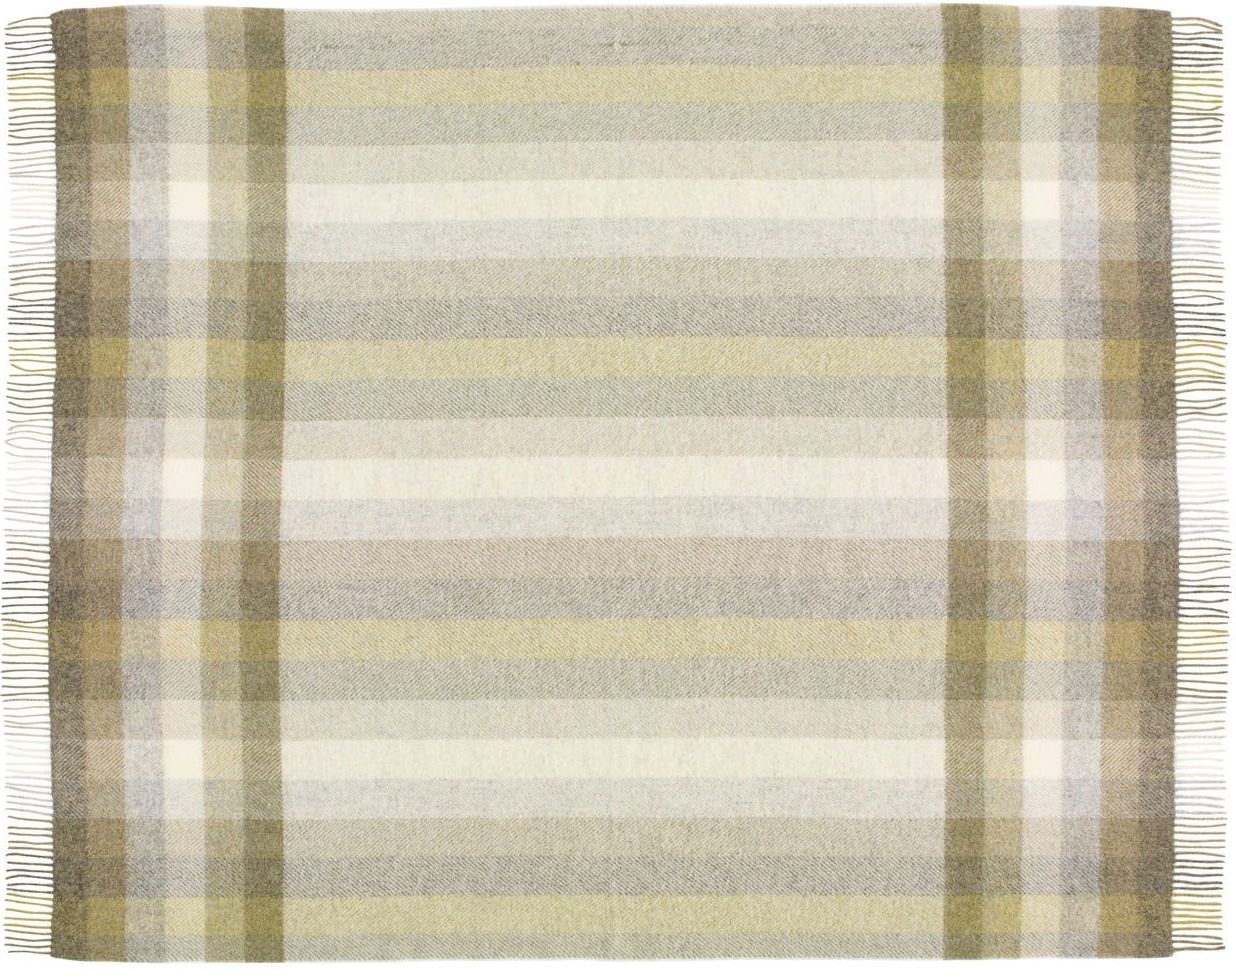 Bronte by Moon Woodvale Olive Throw Blanket